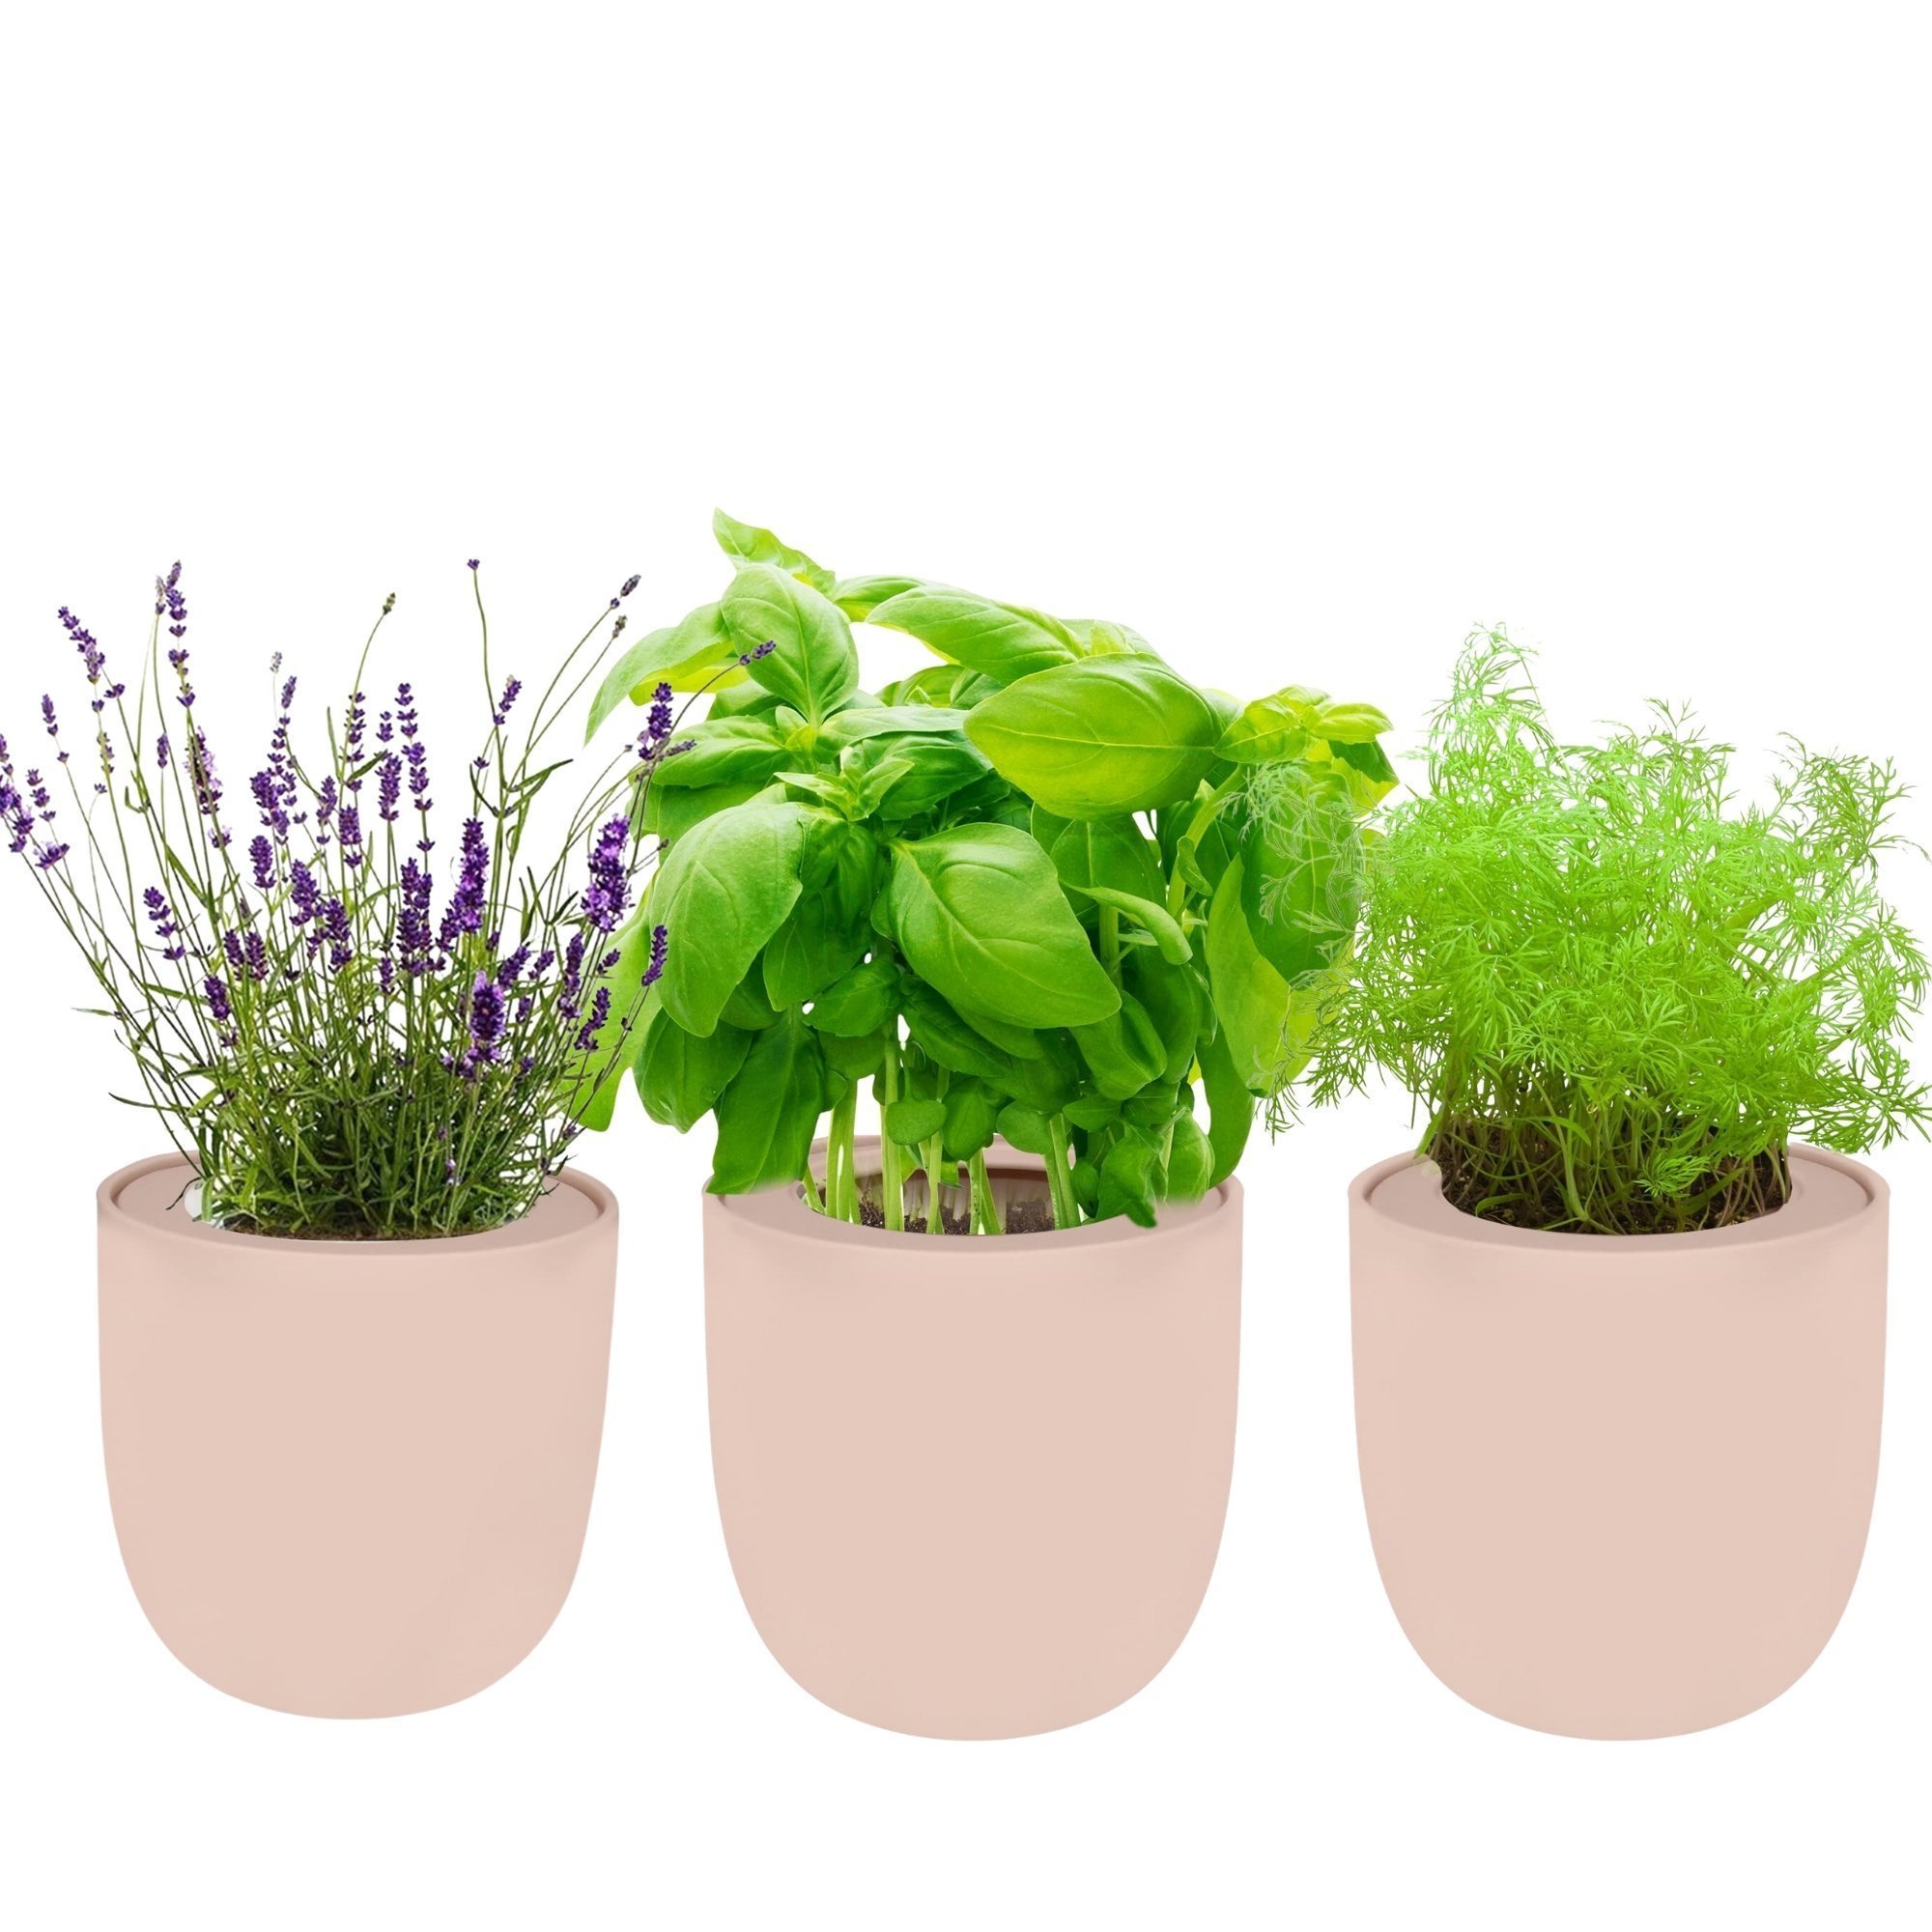 Hydroponic Herb Growing Trio Sets with Pink Ceramic Pot and Seeds (Basil, Dill, Lavender)